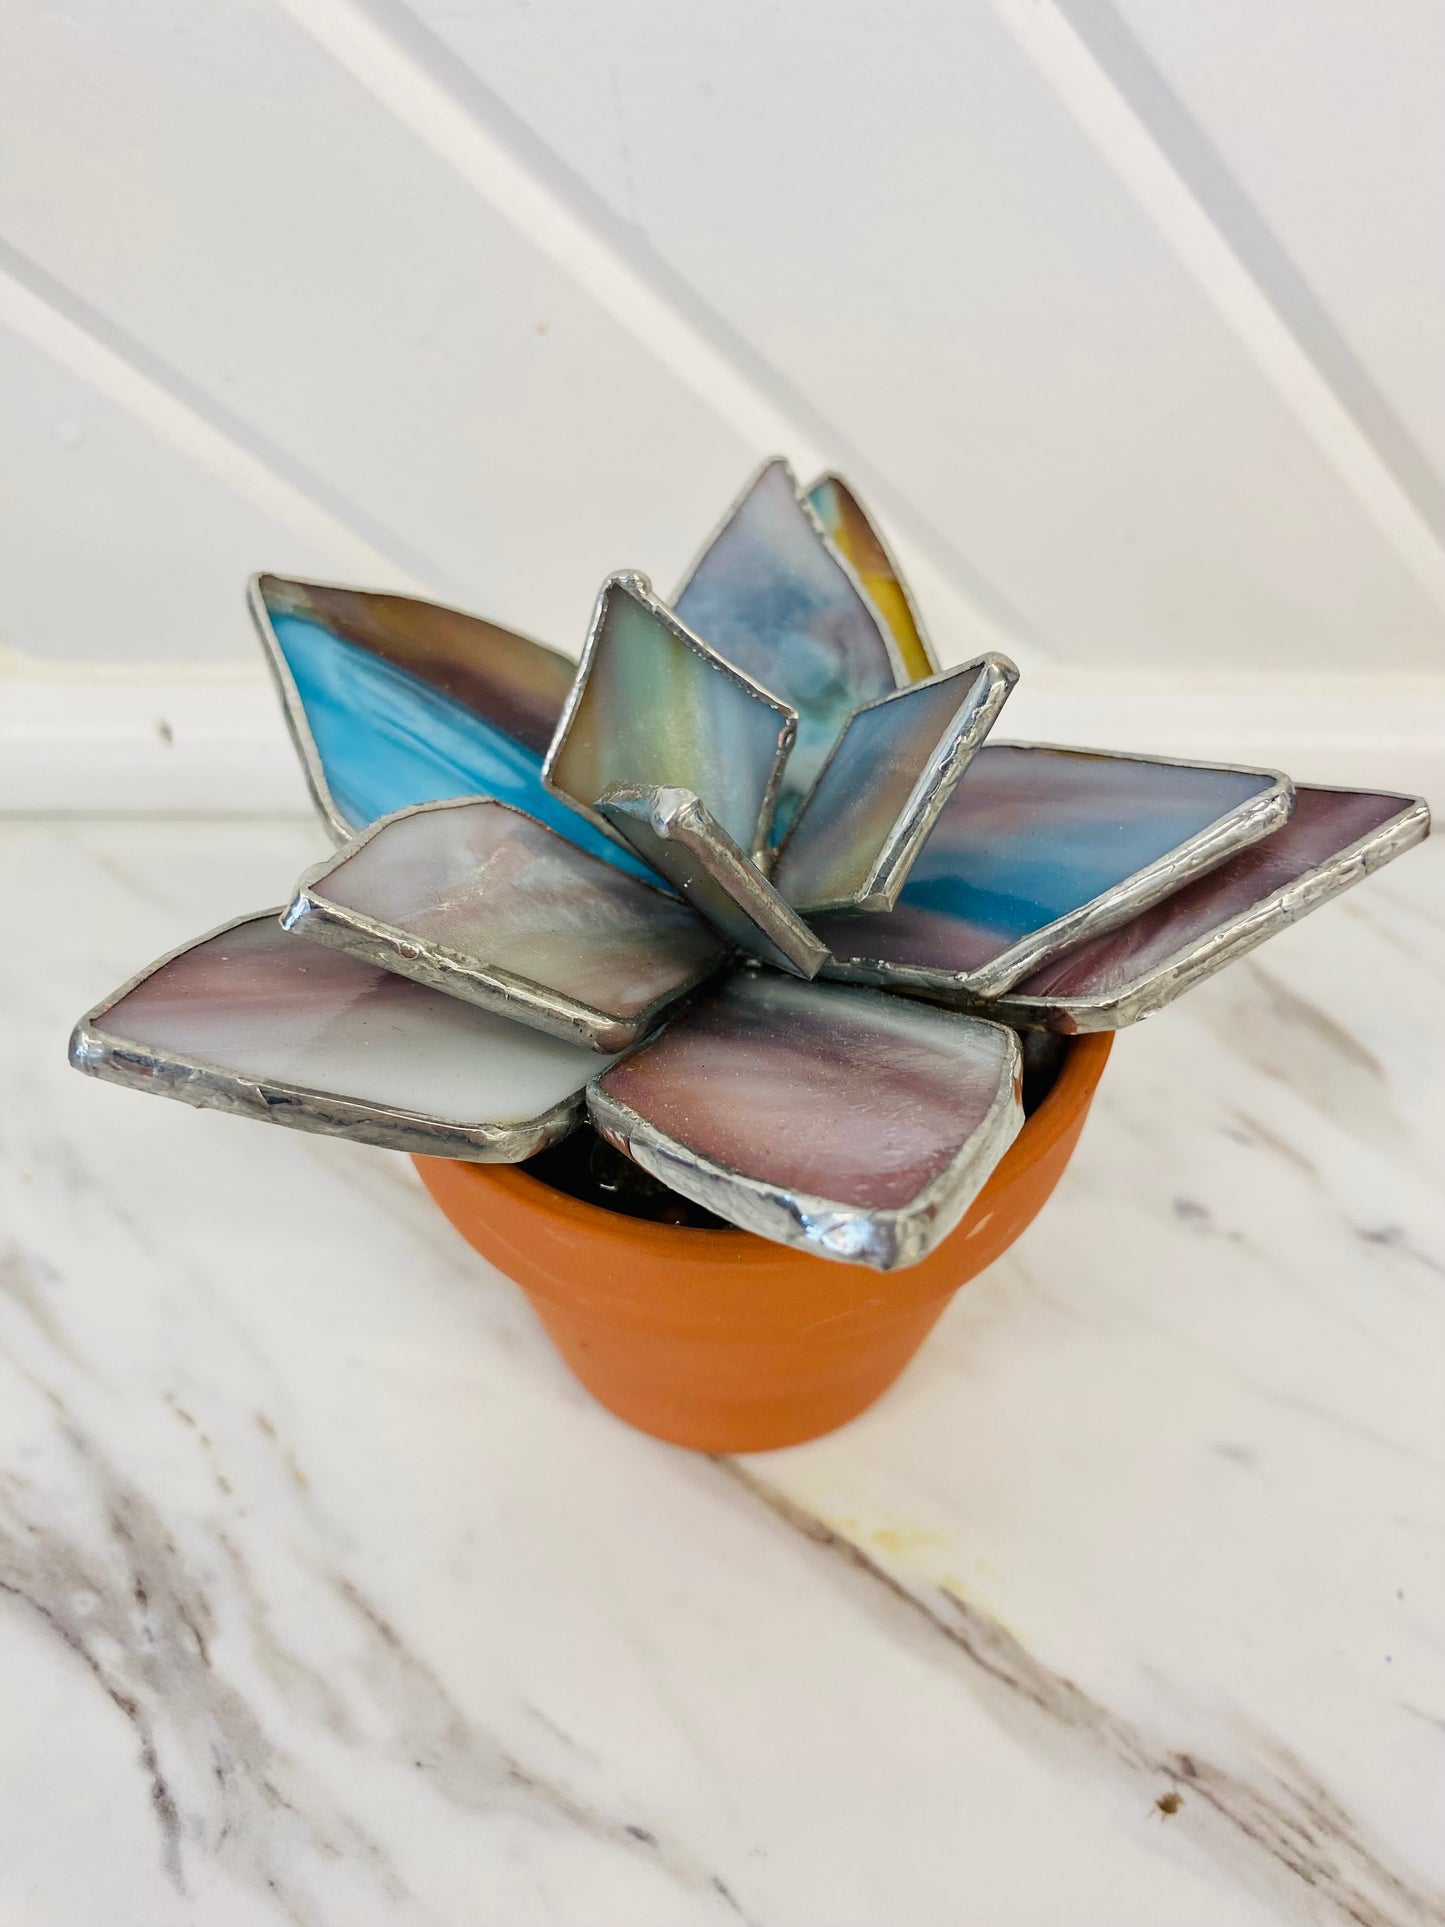 Stained Glass Succulent in Pot